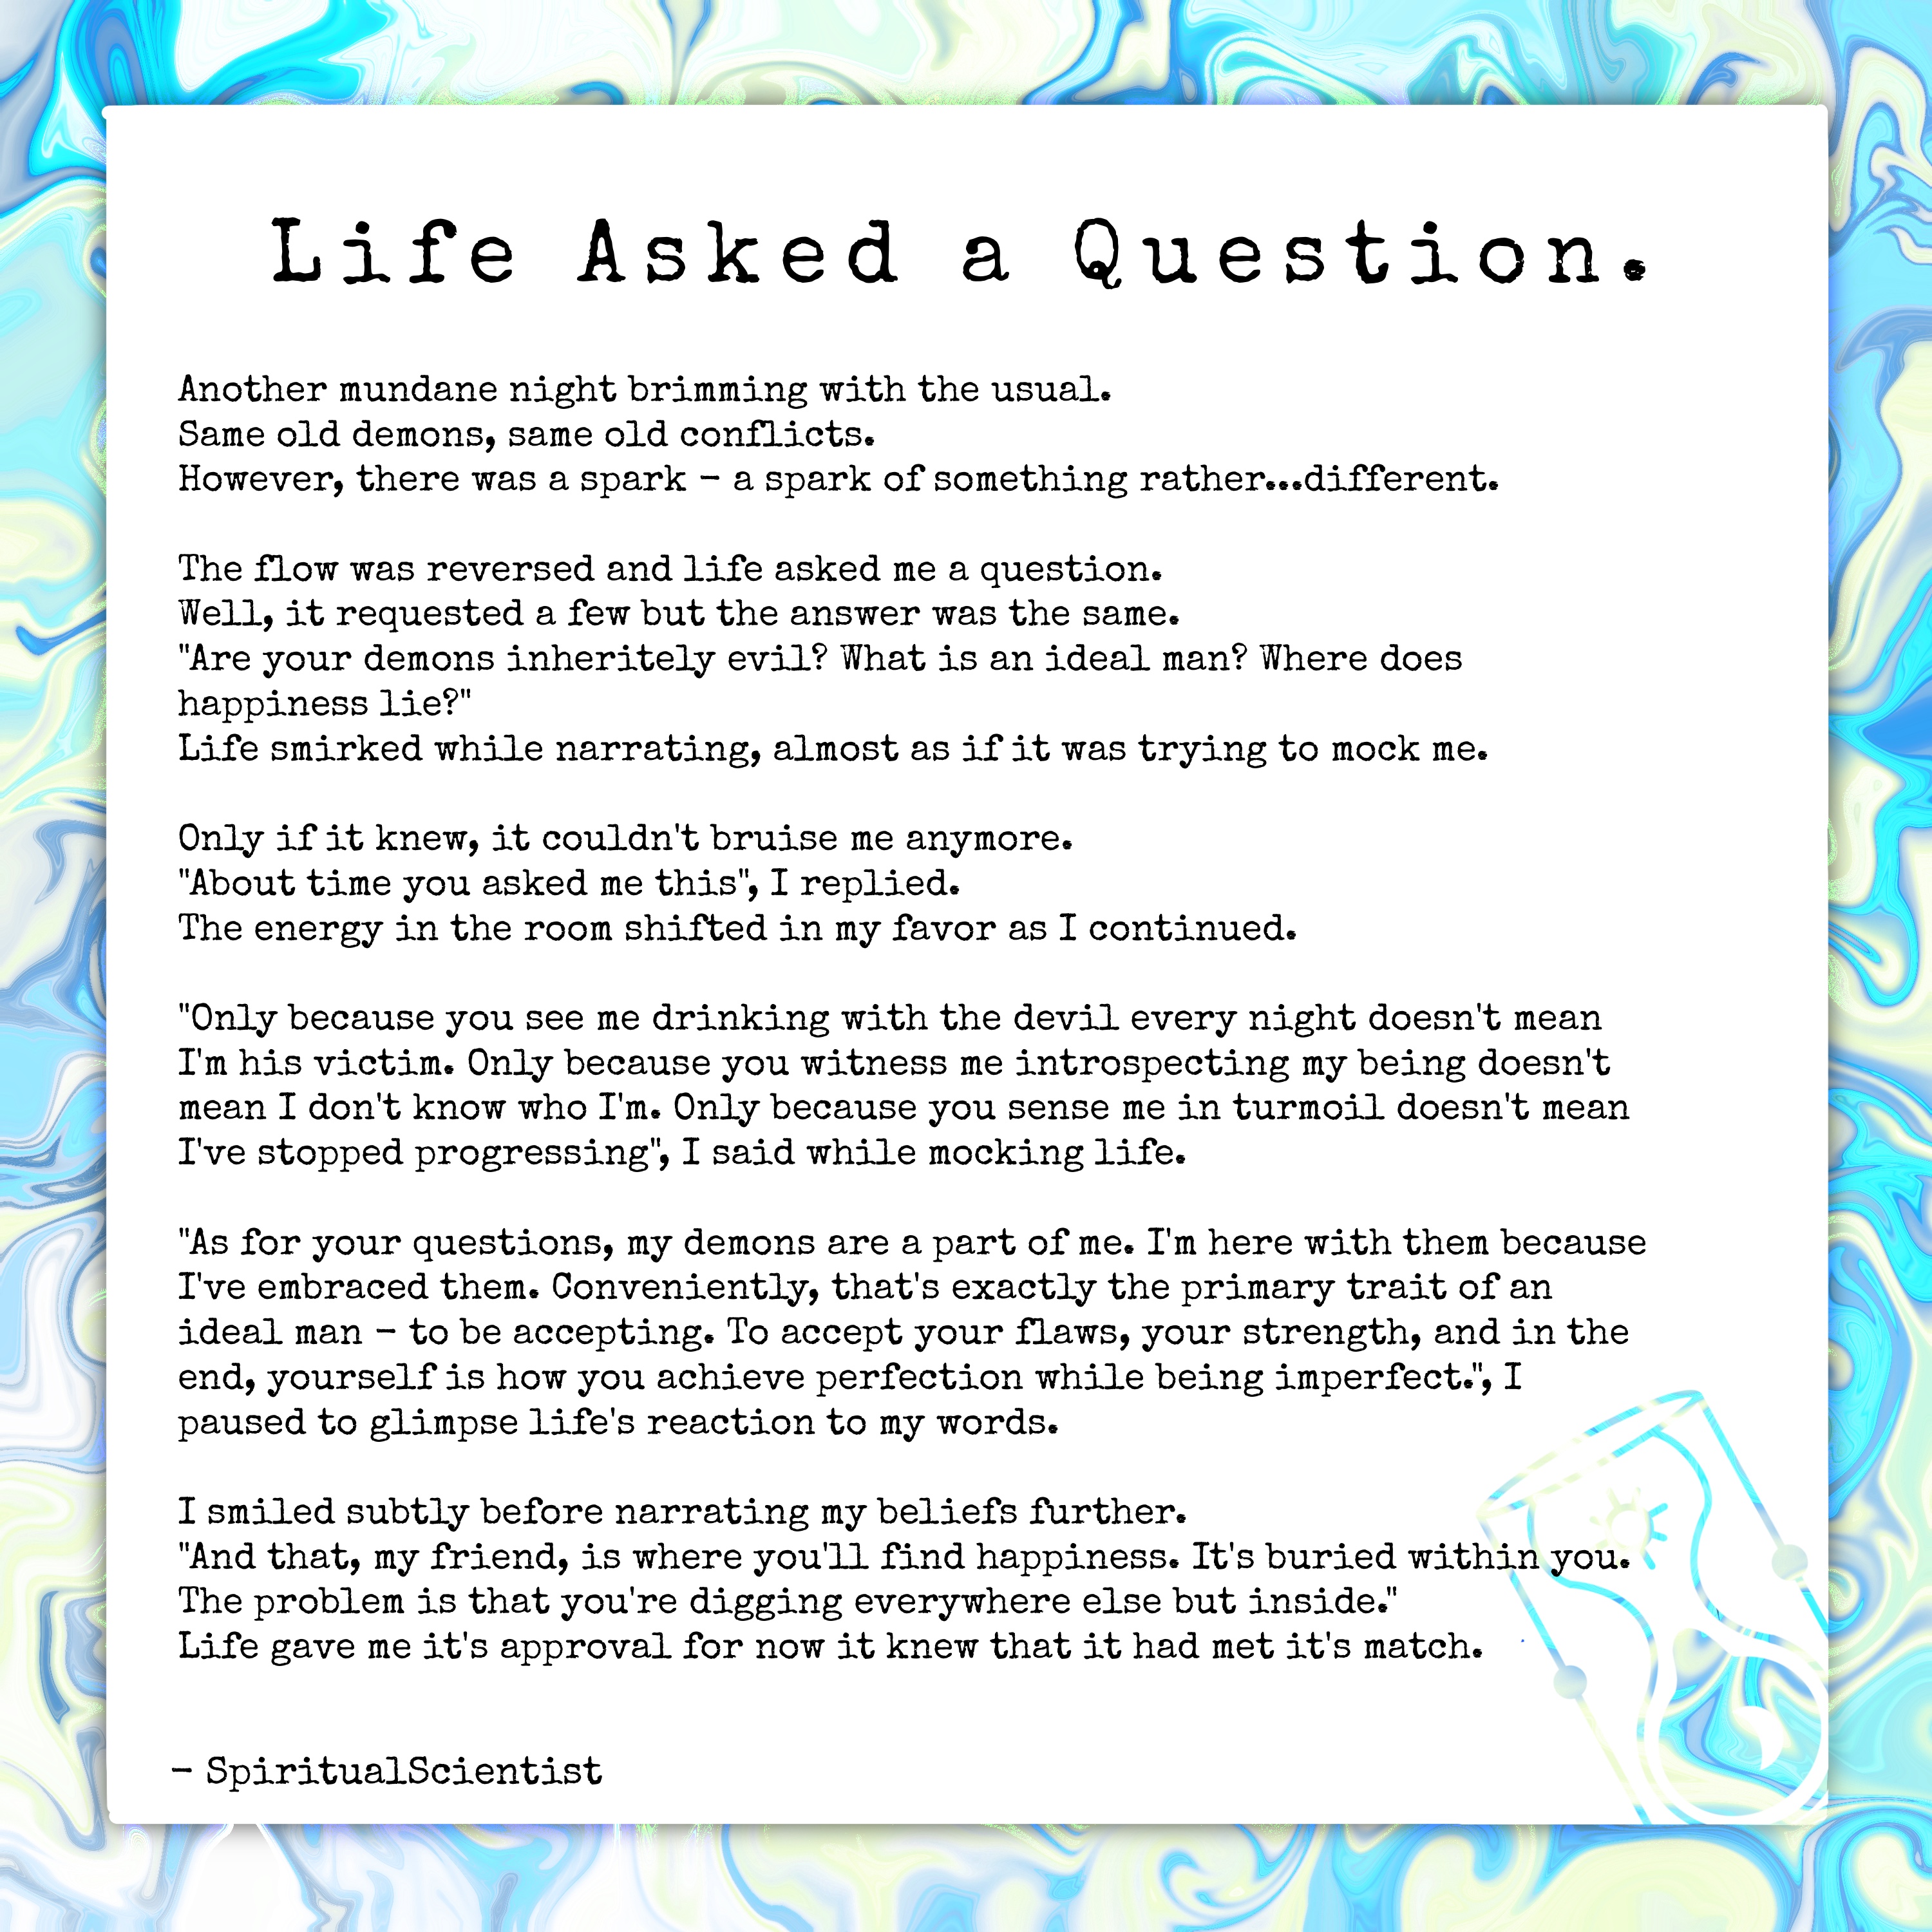 Nft Life Asked a Question.